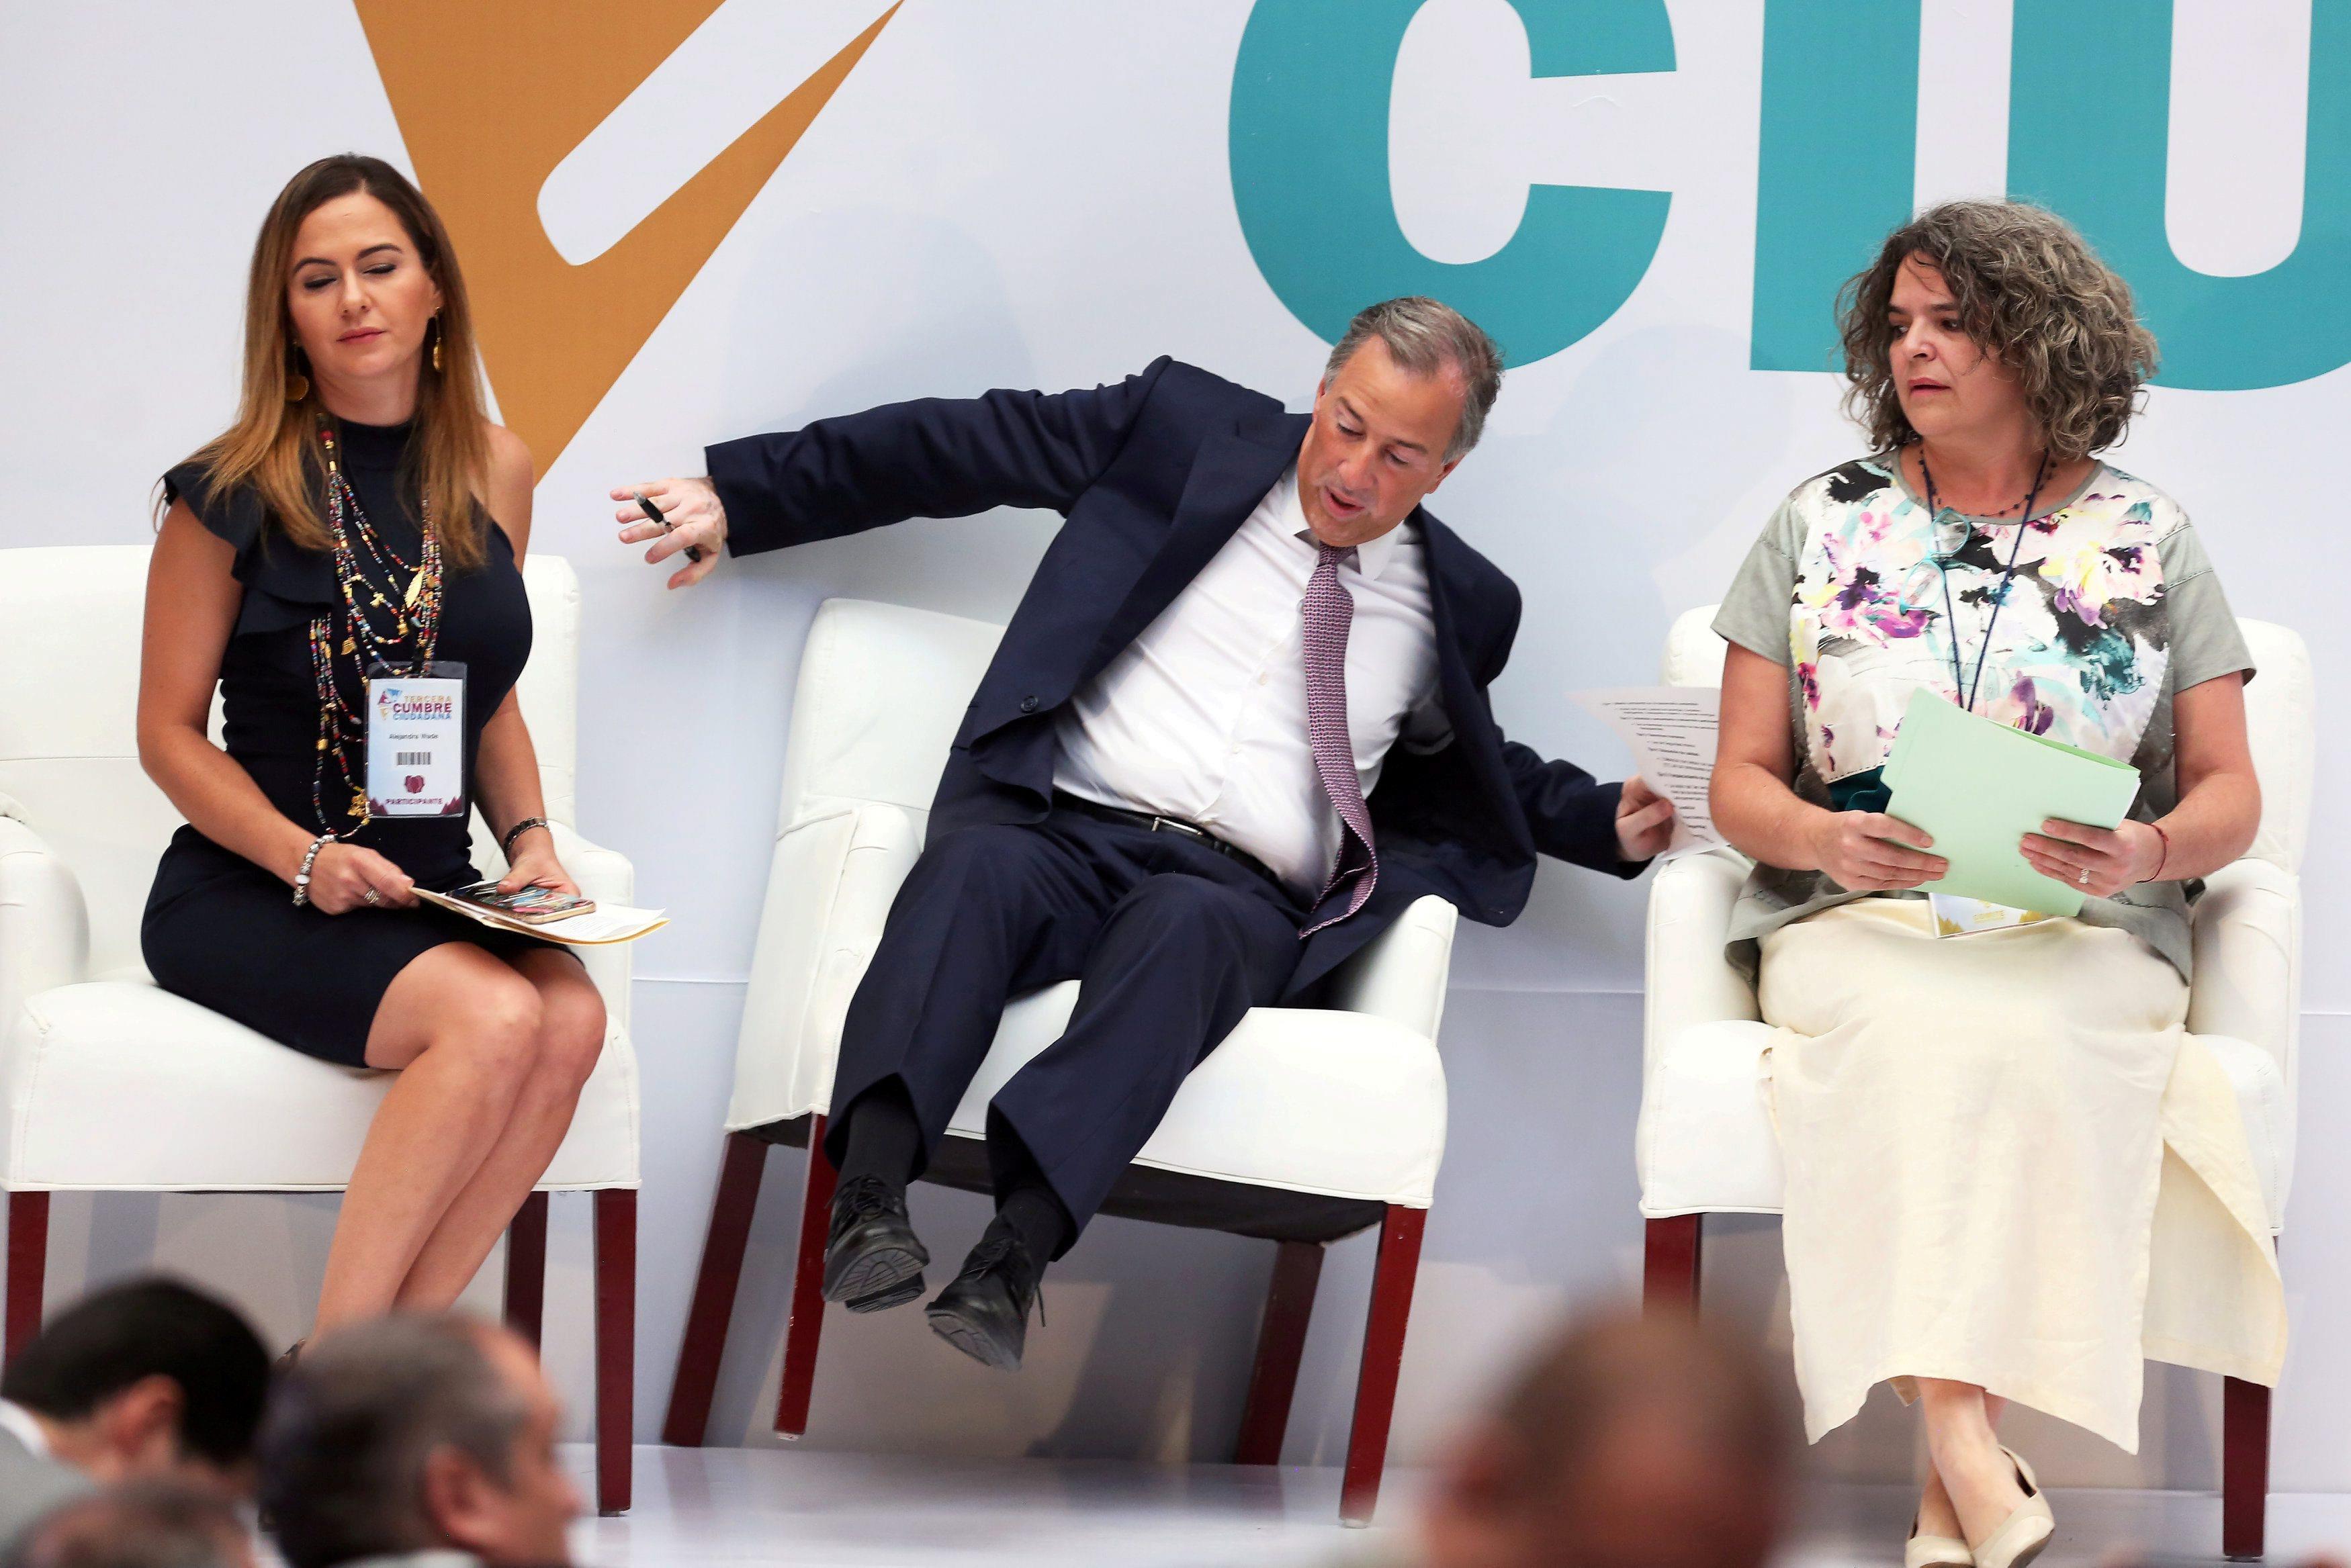 PRI presidential candidate Jose Antonio Meade reacts while falling off his chair after arriving to a